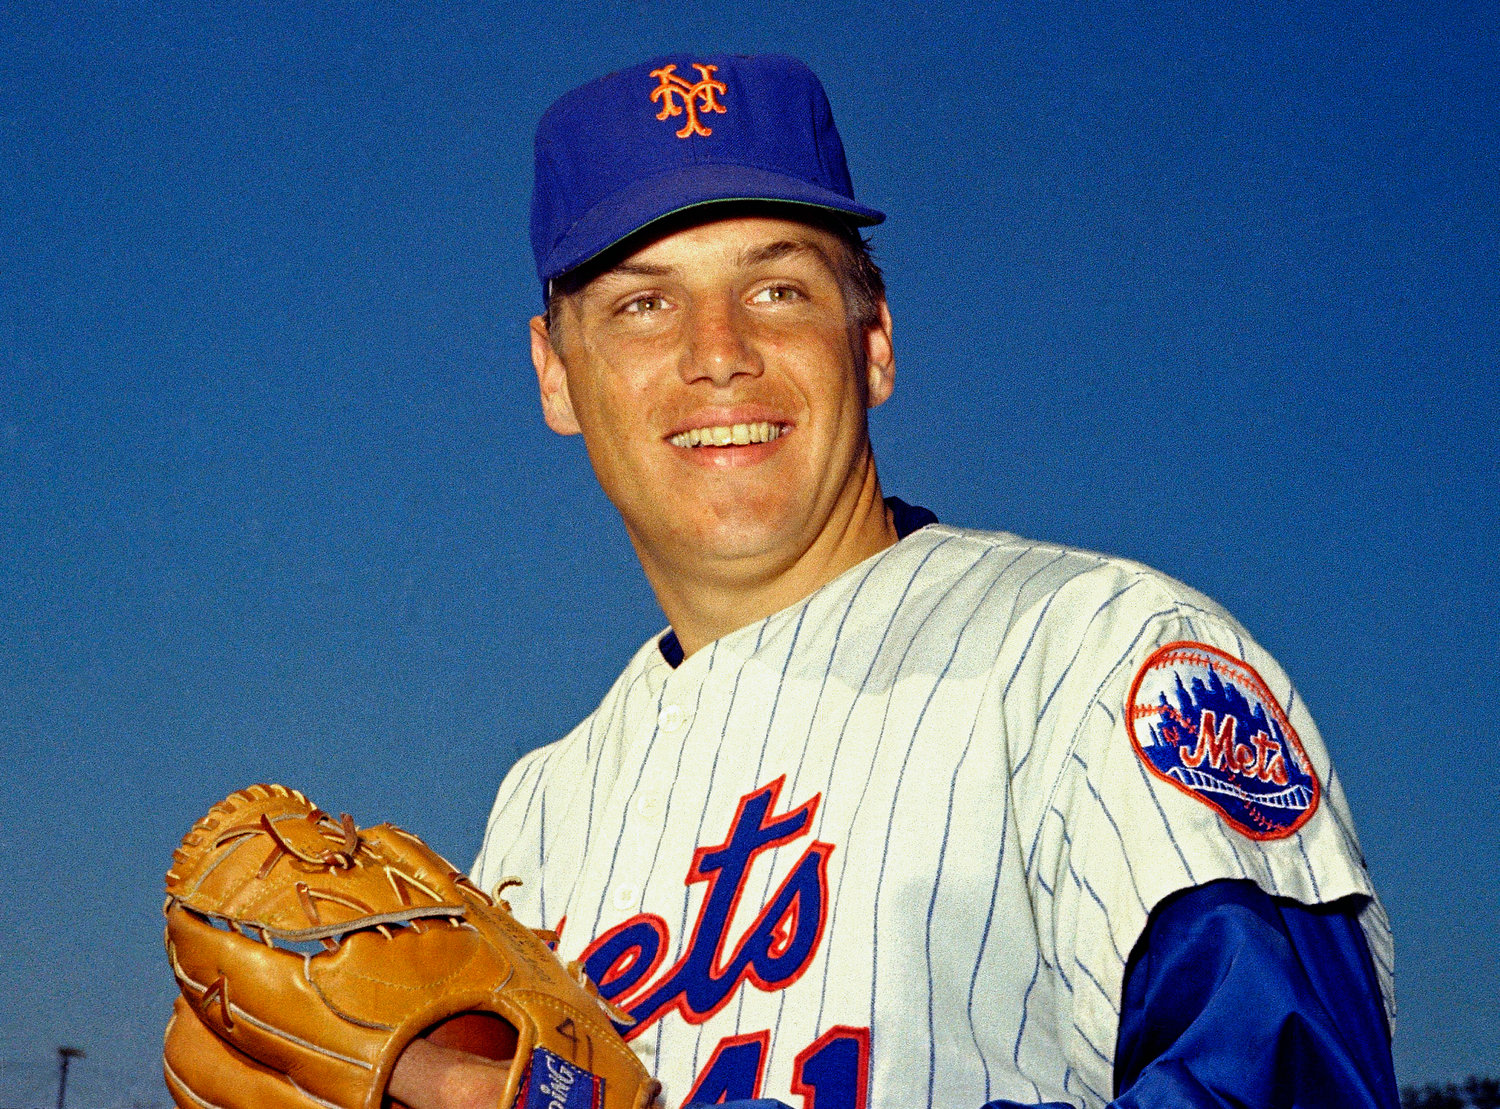 THE FRANCHISE — In this March 1968 file photo, New York Mets pitcher Tom Seaver poses for a photo, location not known. Seaver, the galvanizing leader of the Miracle Mets 1969 championship team and a pitcher who personified the rise of expansion teams during an era of radical change for baseball, has died. He was 75. The Hall of Fame said Wednesday night, that Seaver died on Aug. 31 from complications of Lewy body dementia and COVID-19.